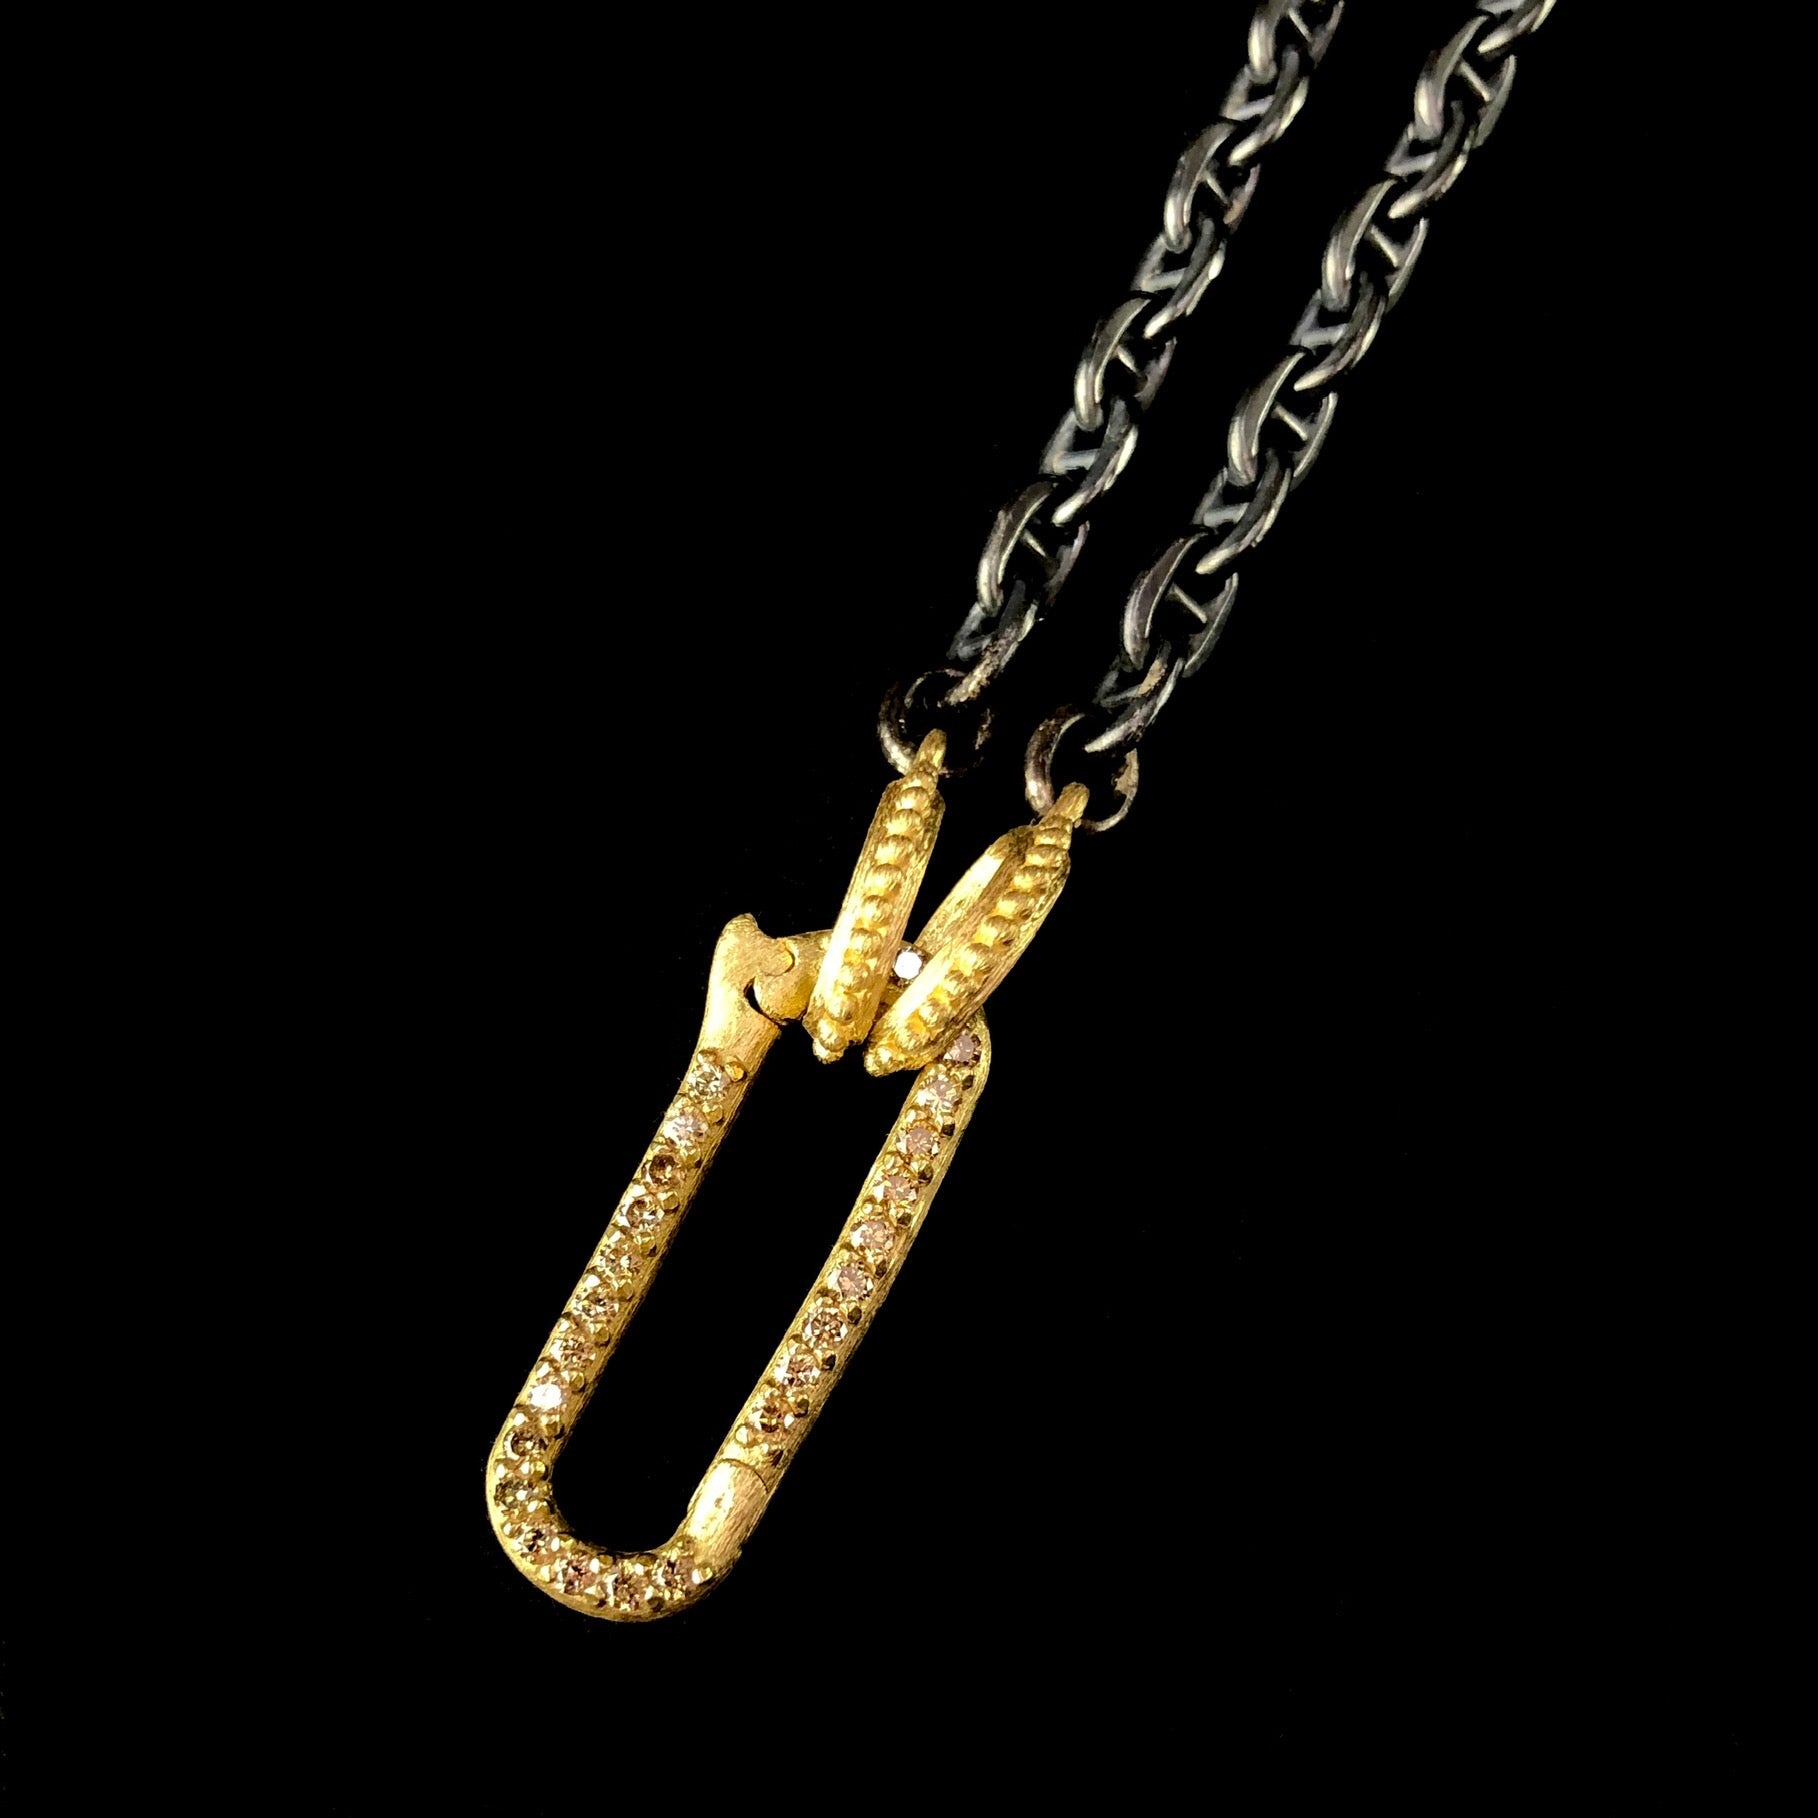 Gold Oval Ended Anchor Chain with Large Diamond Paperclip Charm Holder